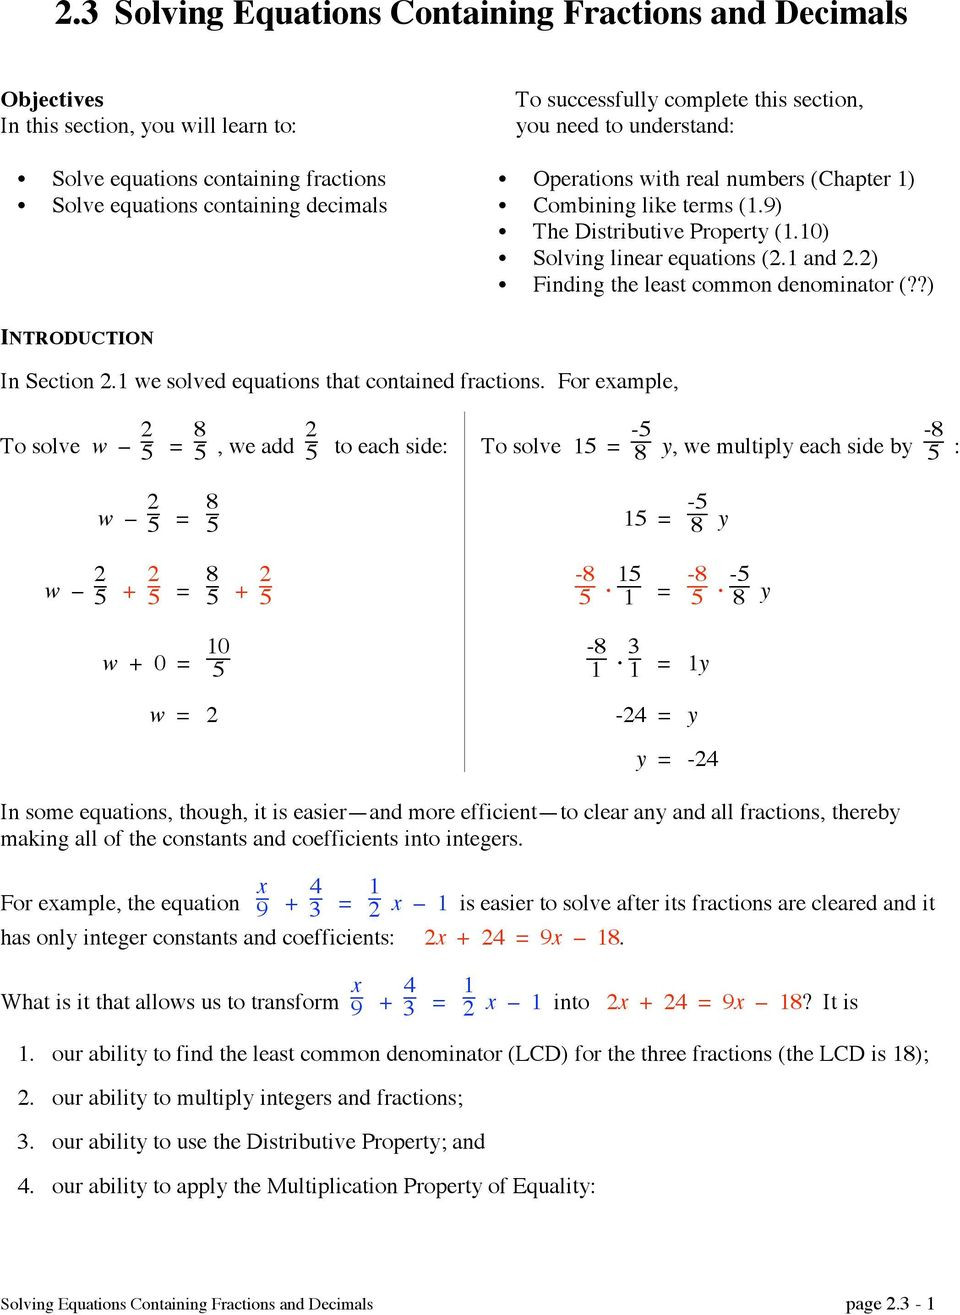 Solving Equations with Fractions Worksheet 2 3 solving Equations Containing Fractions and Decimals